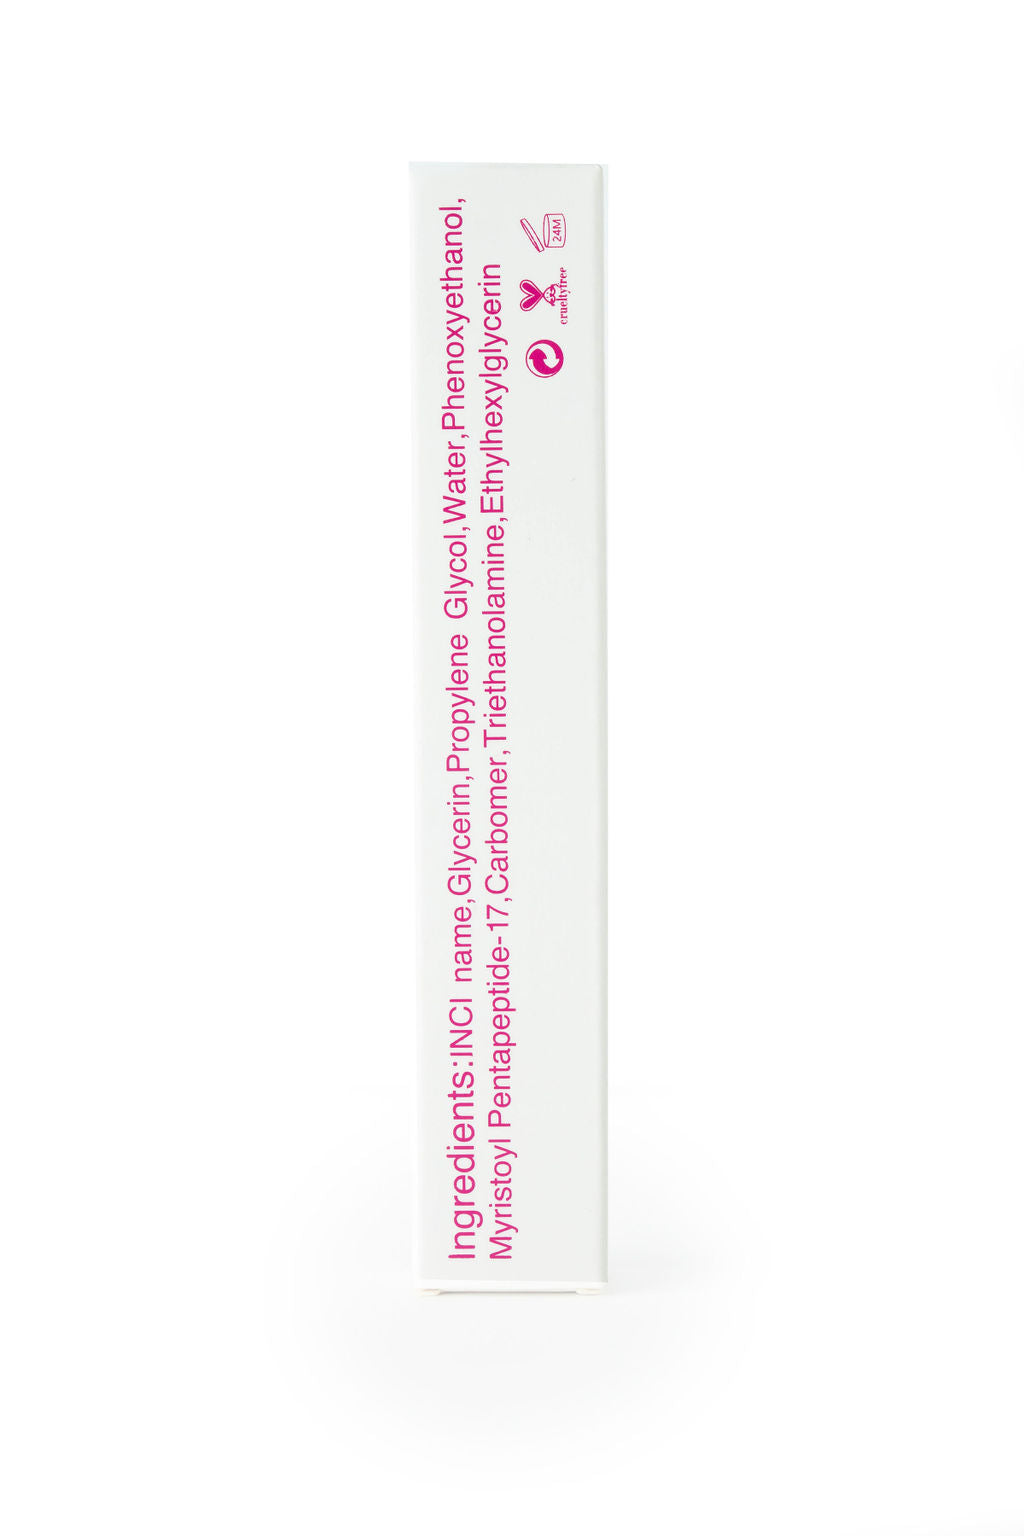 Serum for the growth and strengthening of natural eyelashes